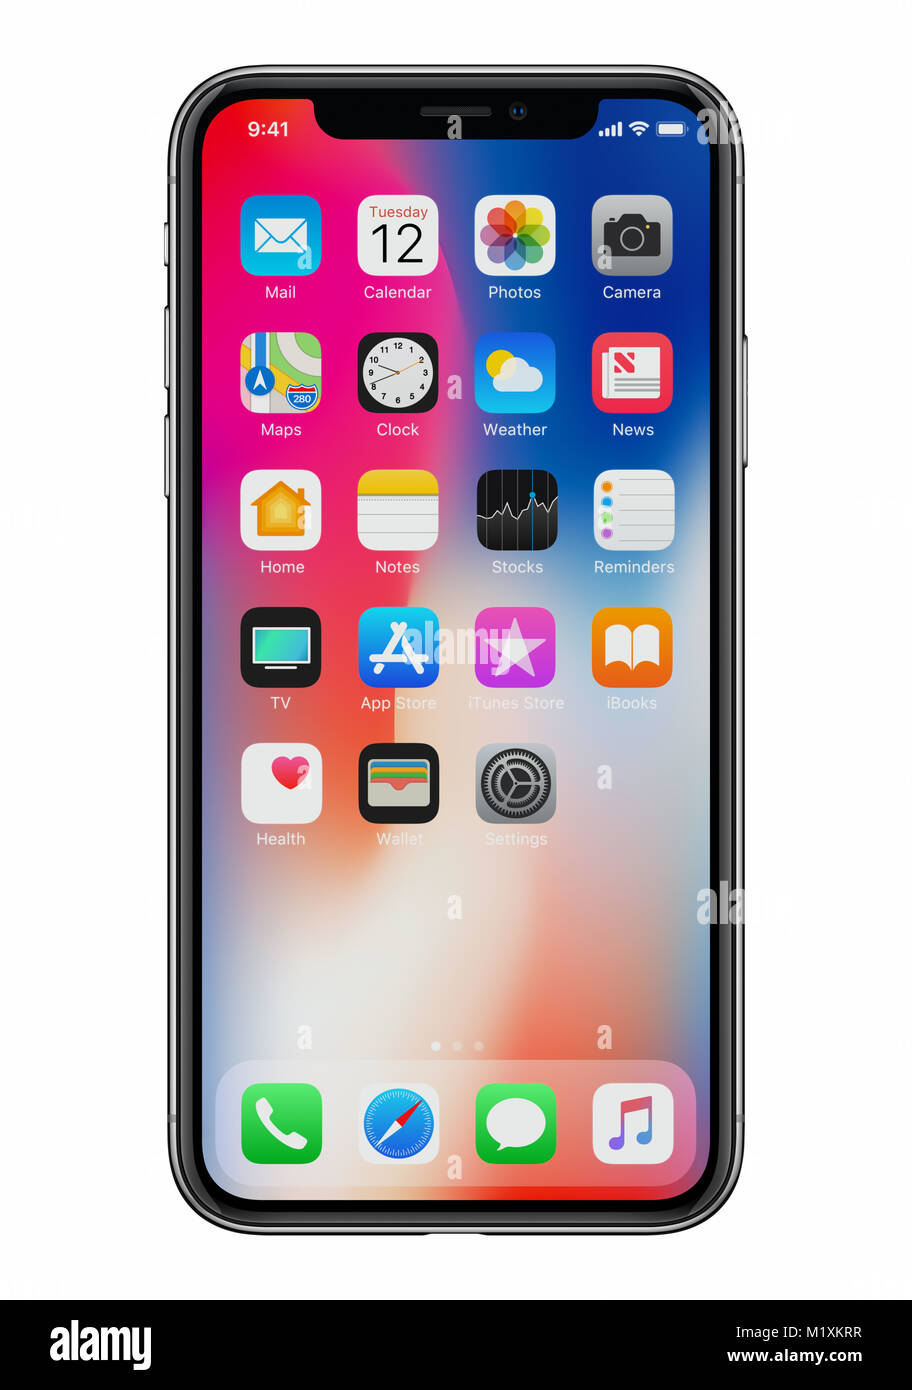 New Apple iPhone X 10 front view on white background. New features in iOS 11 make iPhone X even more capable. Stock Photo